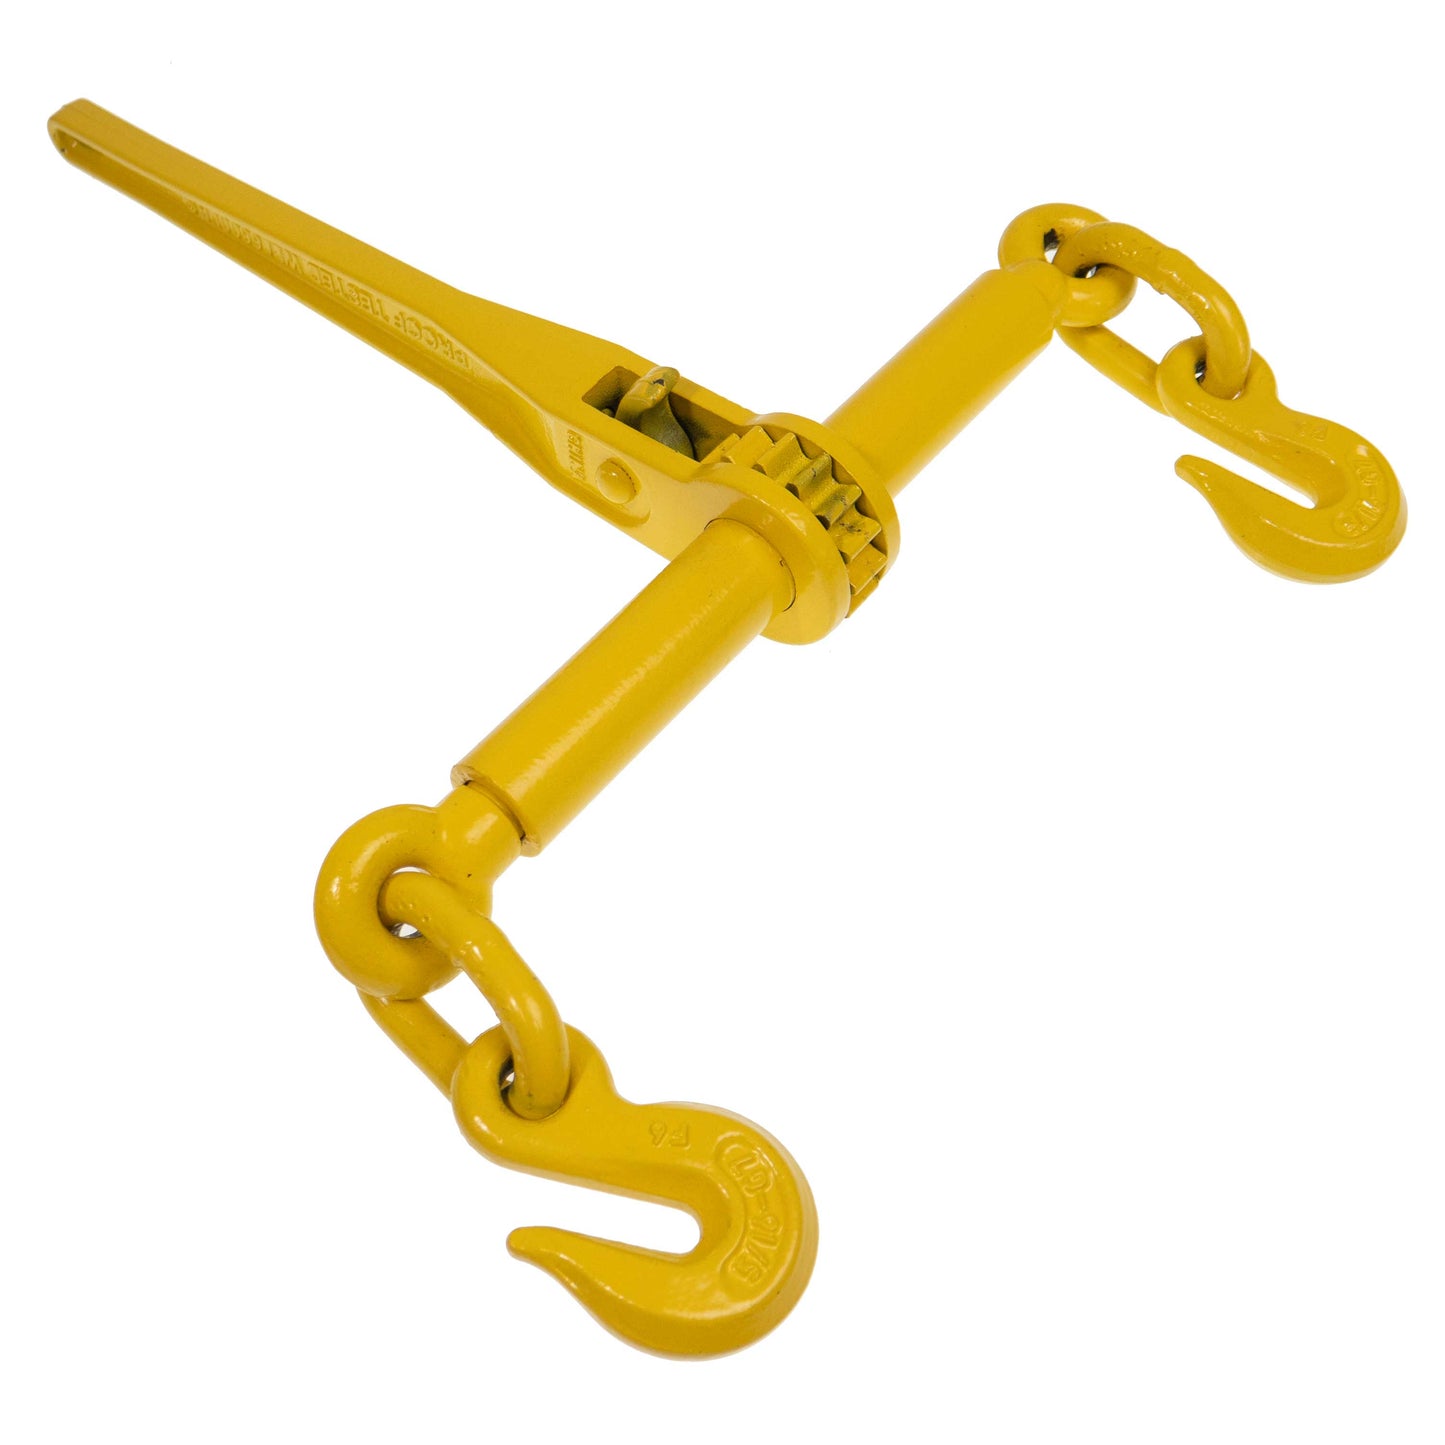 516 inch 38 inch Heavy Duty Ratchet Chain Binder image 1 of 2 image 2 of 2